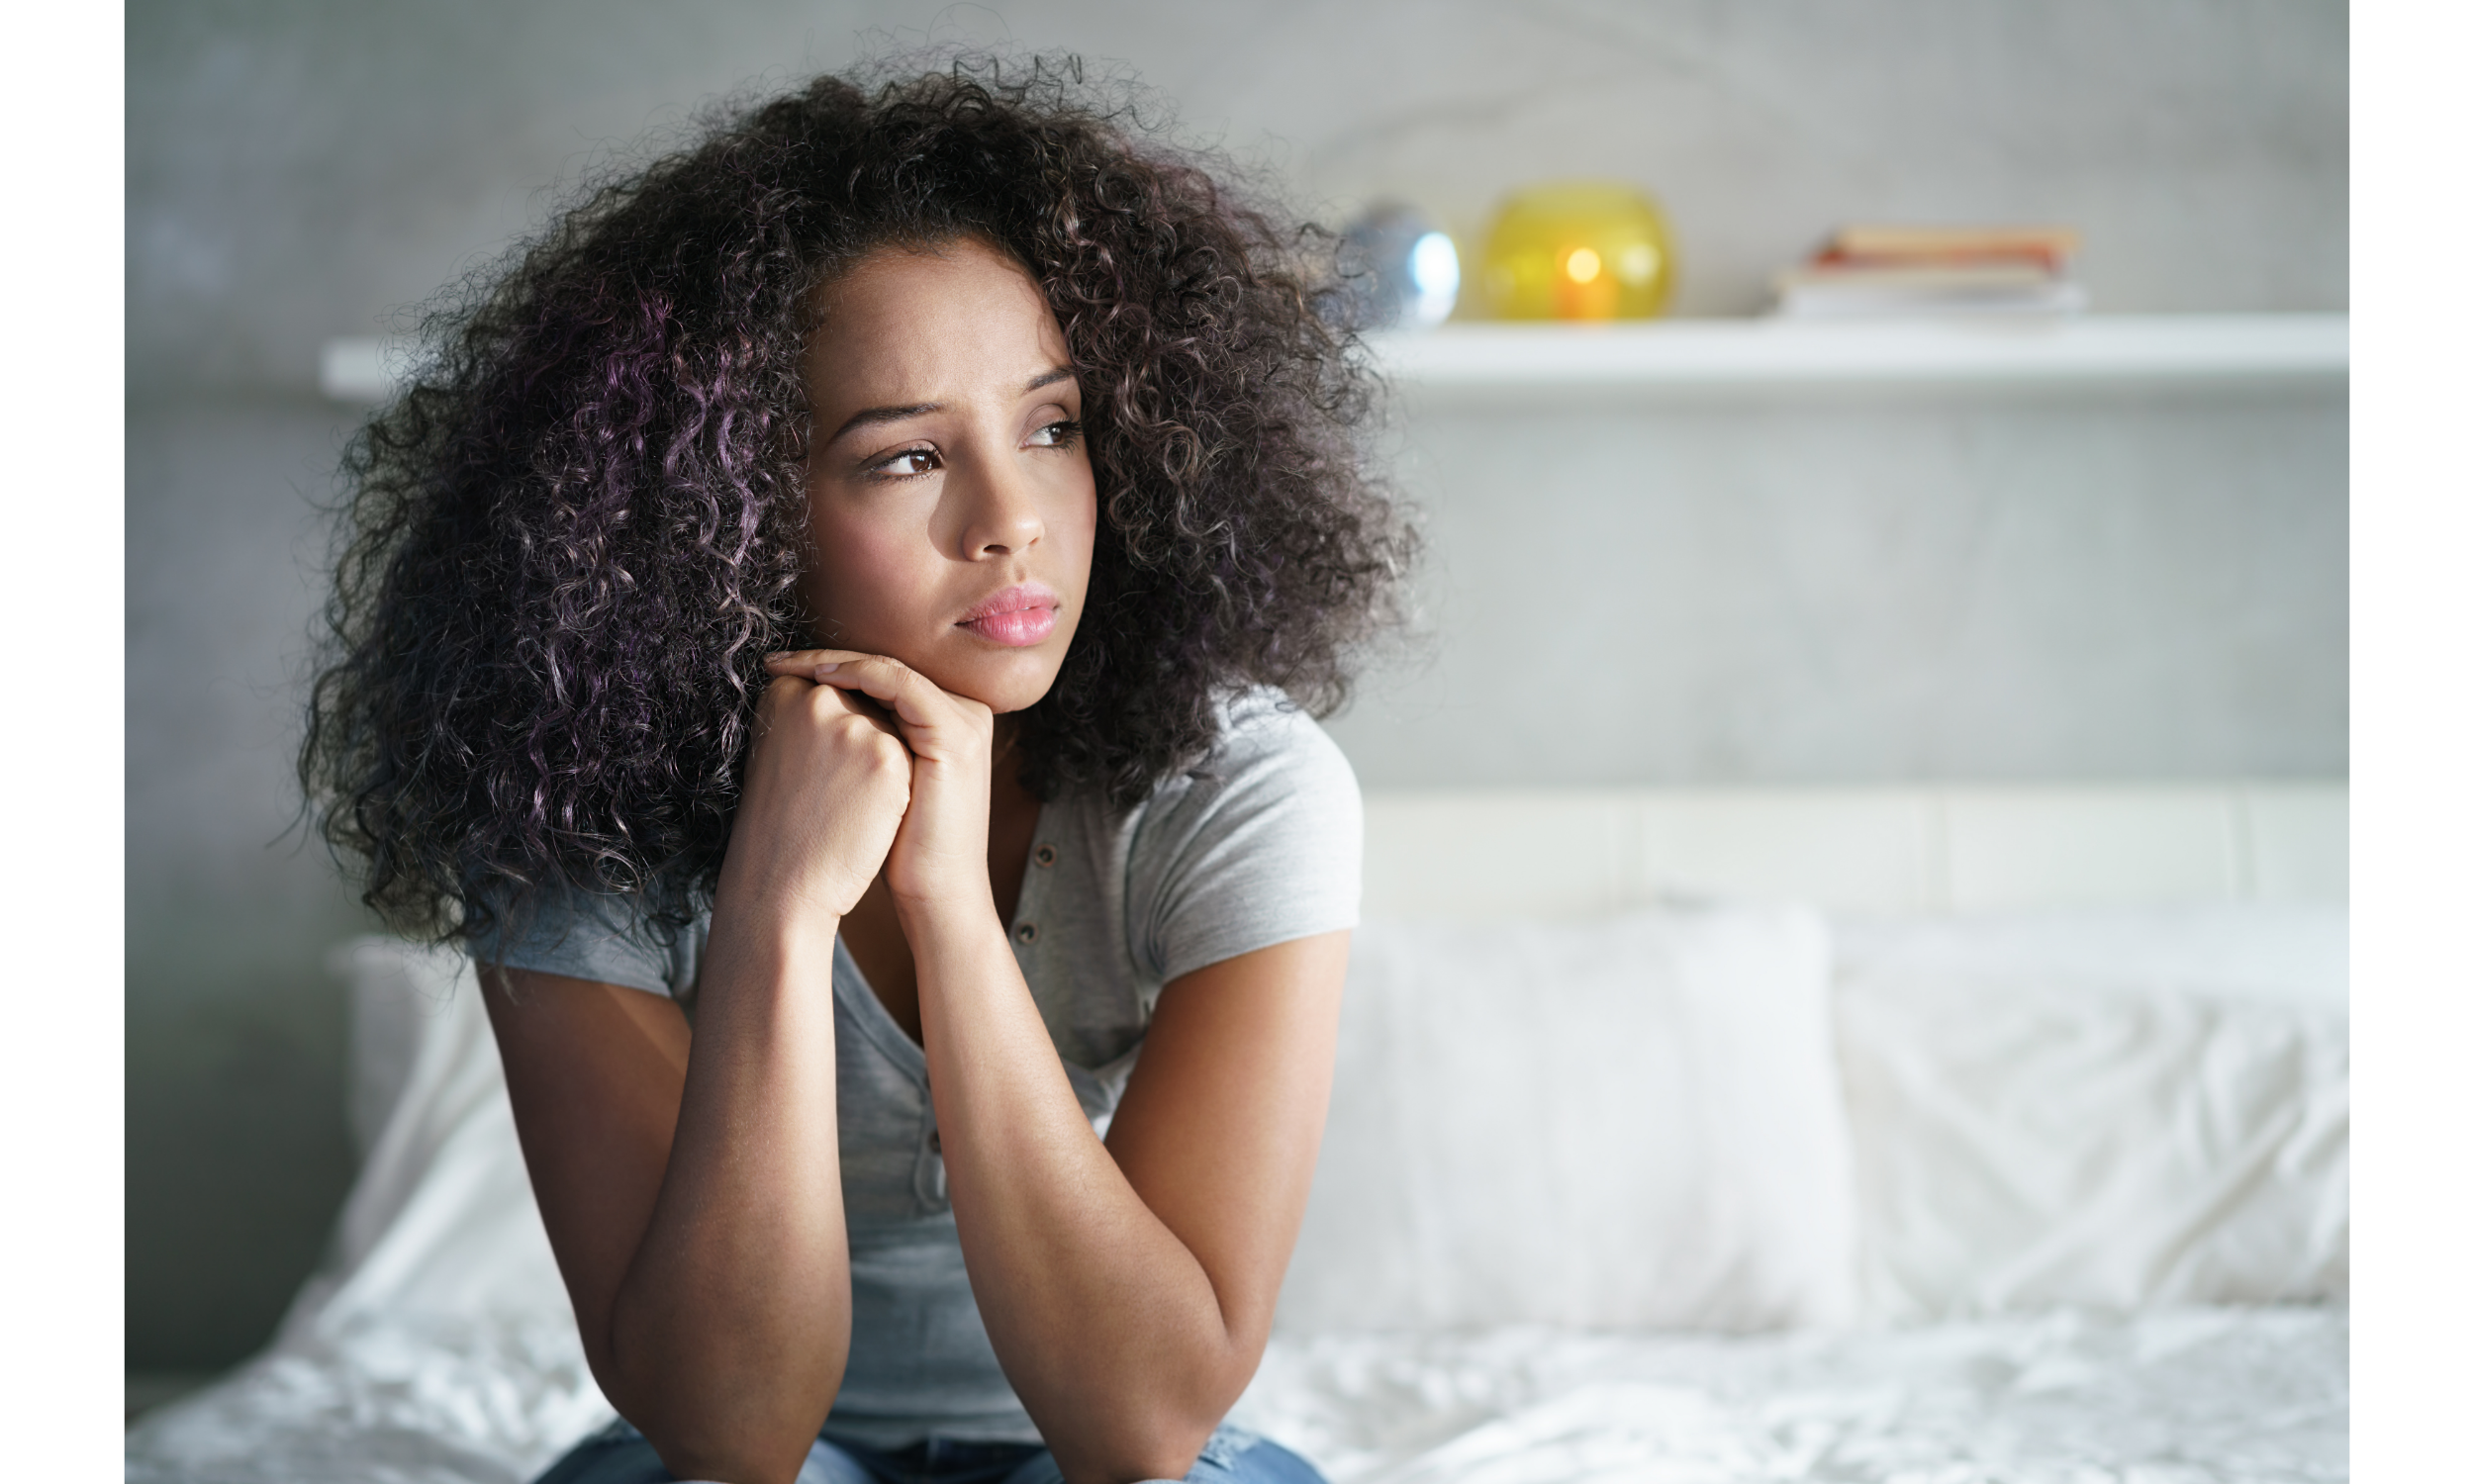 Image of Woman with Anxiety Sitting on Bed